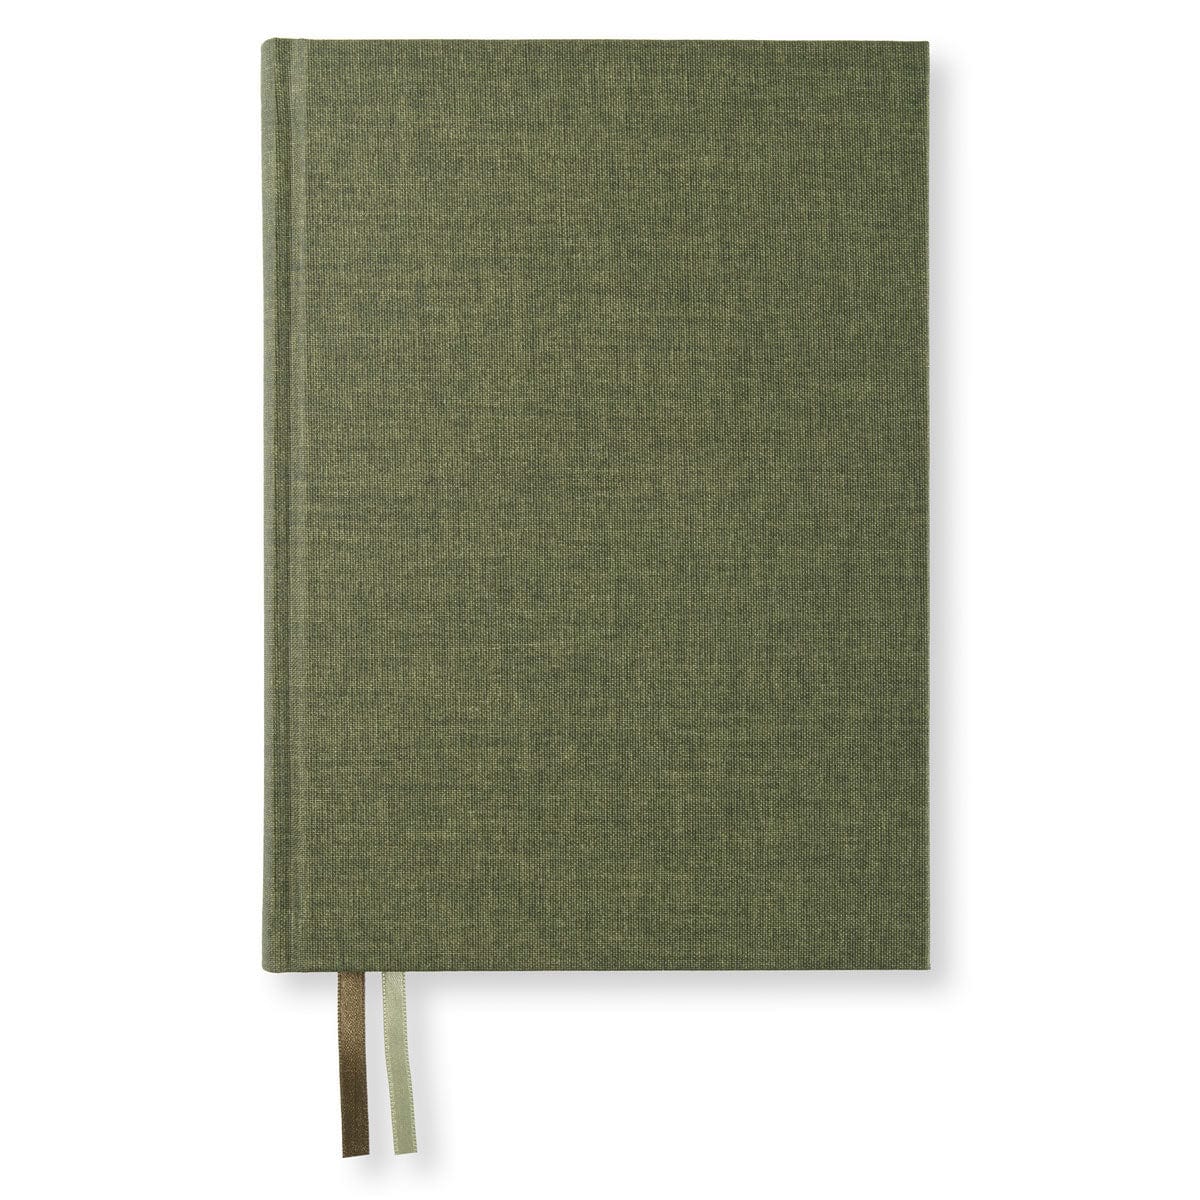 PaperStyle Paperstyle NOTEBOOK A5 256p. Plain Khaki Green